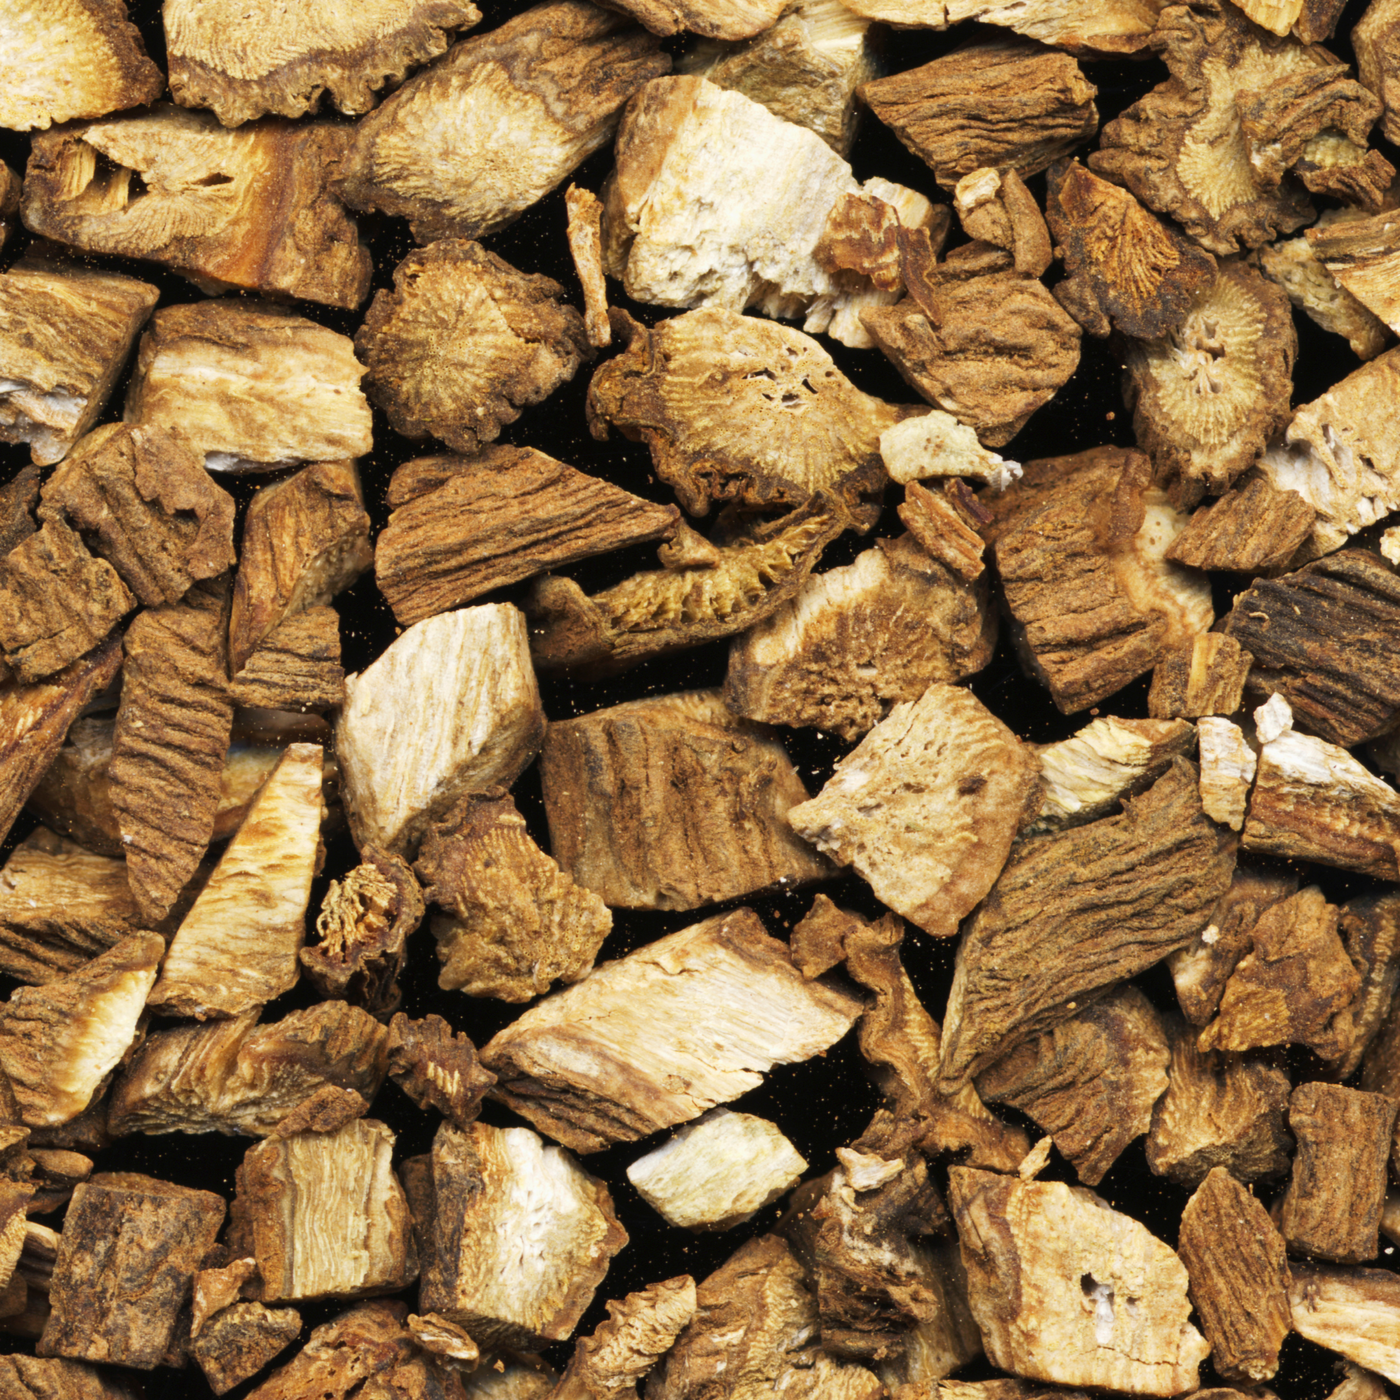 Burdock Root - Cut and Sifted